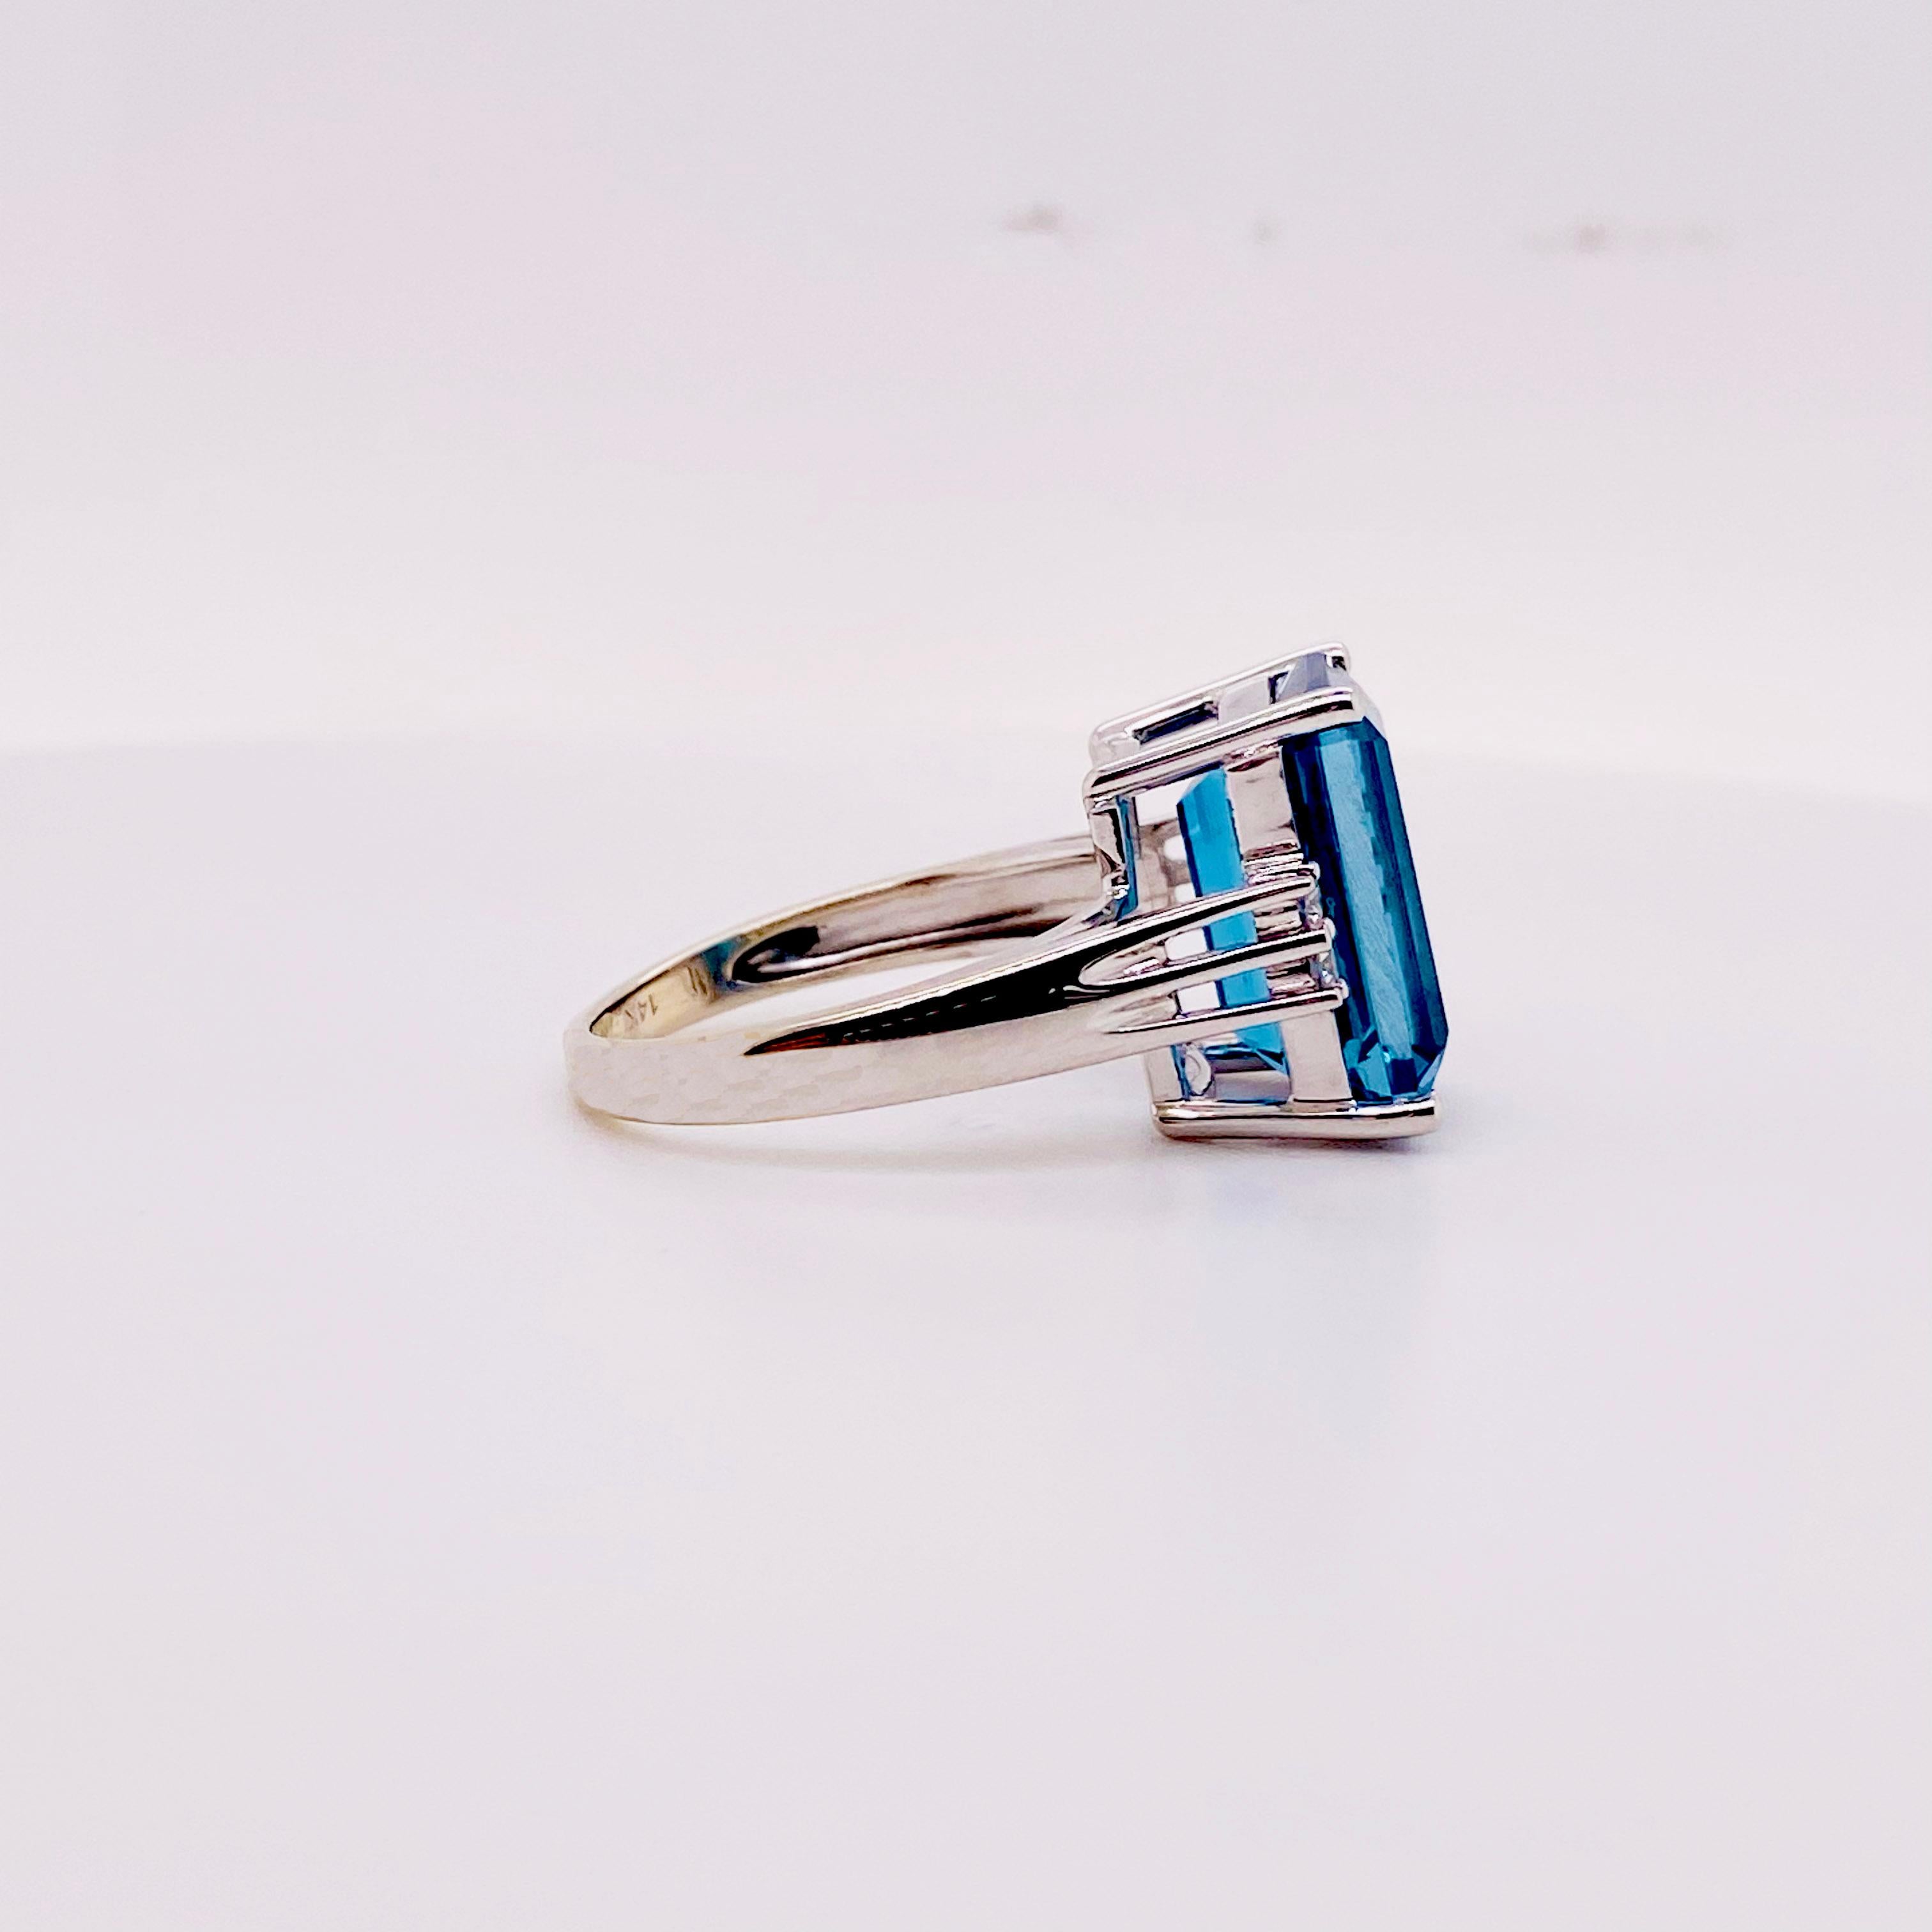 This sexy Royal Blue Topaz is a five stone ring that is gorgeous on any finger! The diamonds and gemstone are securely set with prongs. The ring looks great as a ring finger ring or a middle or pointer finger ring.
The details for this beautiful